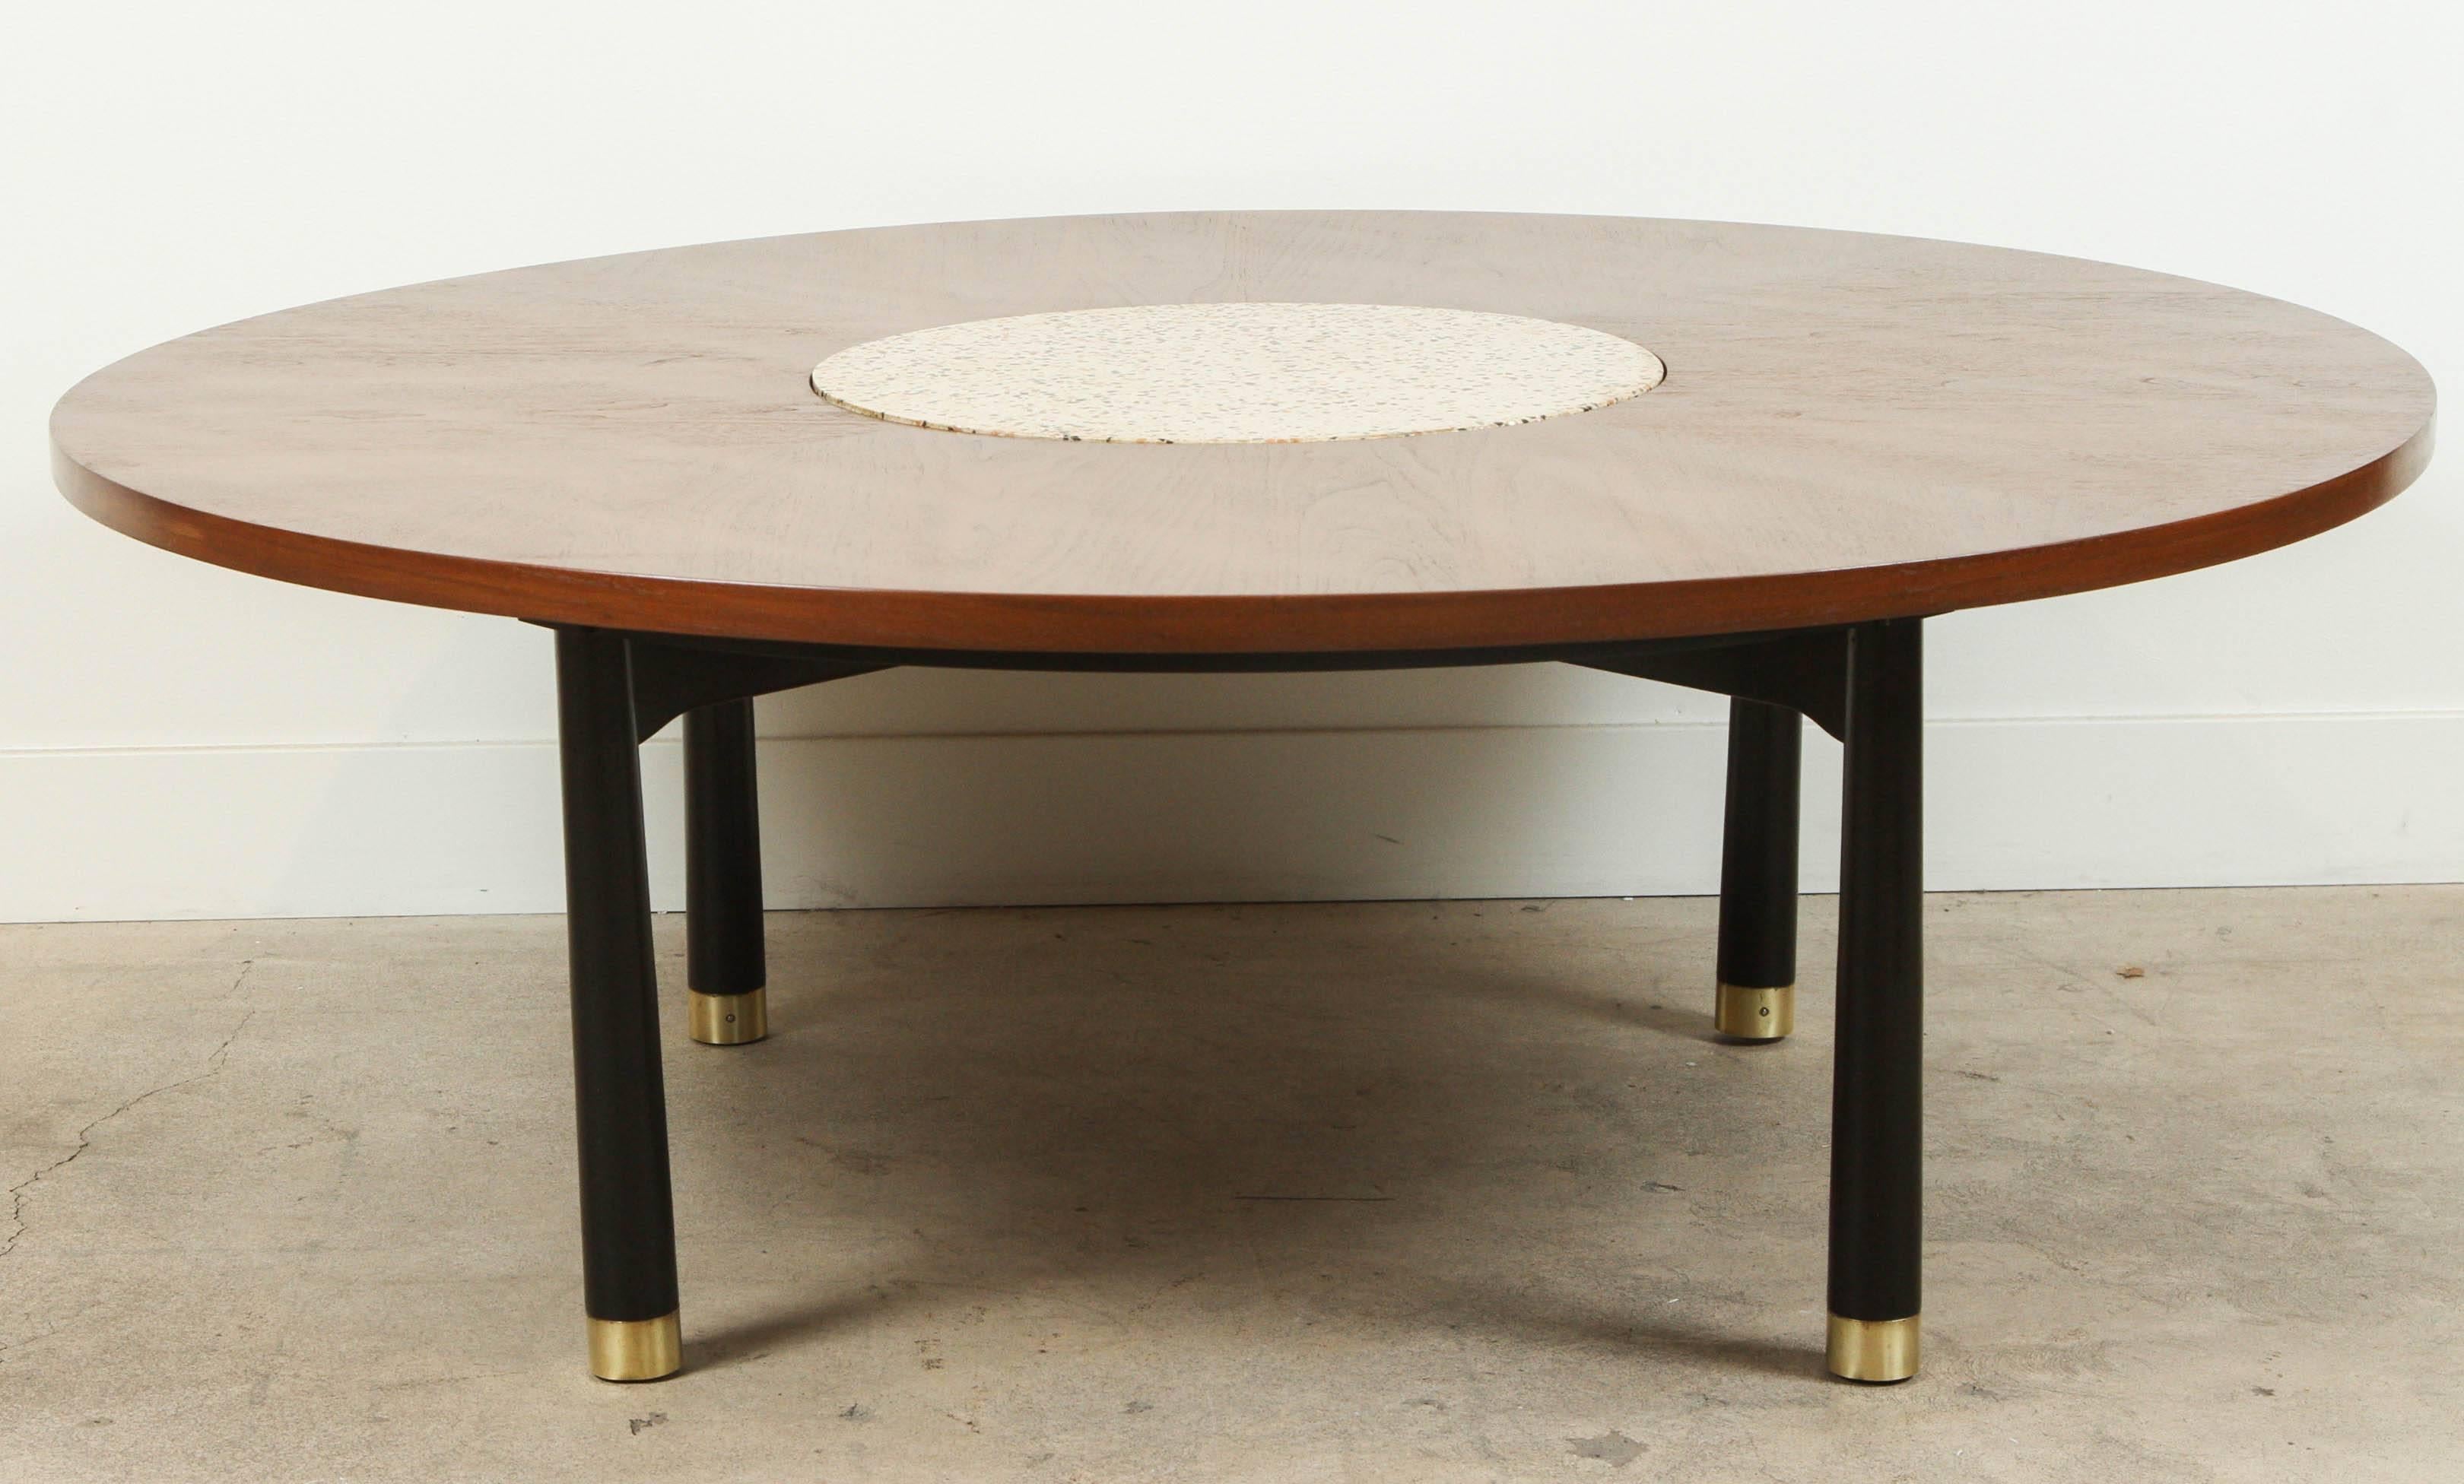 Terrazzo and walnut coffee table by Harvey Probber.